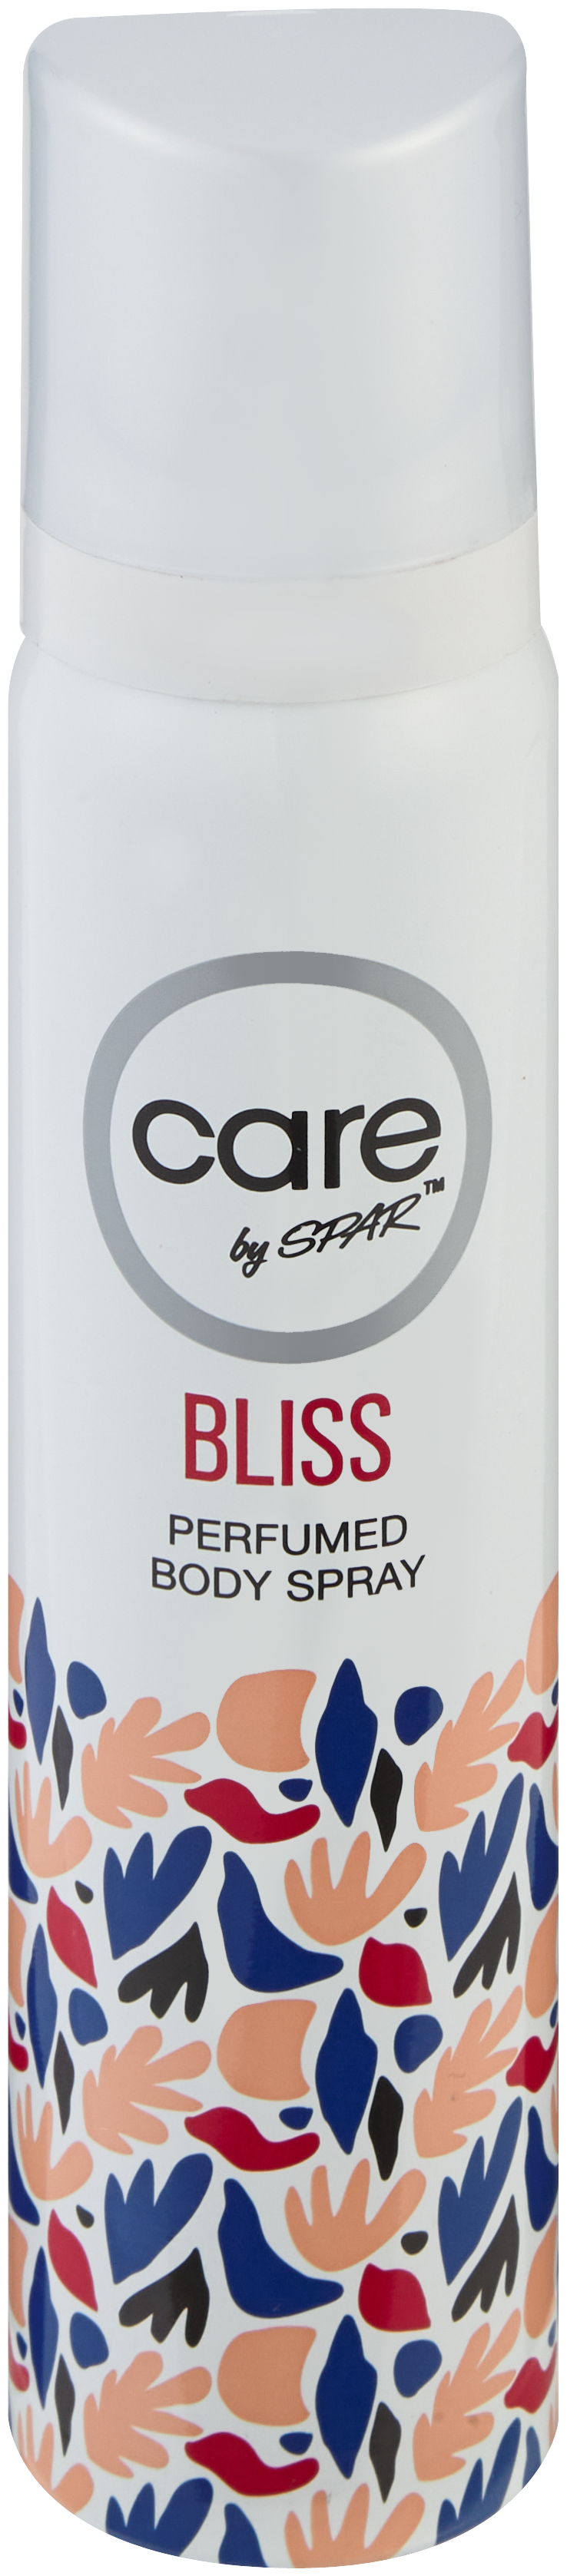 care by spar pbs bliss